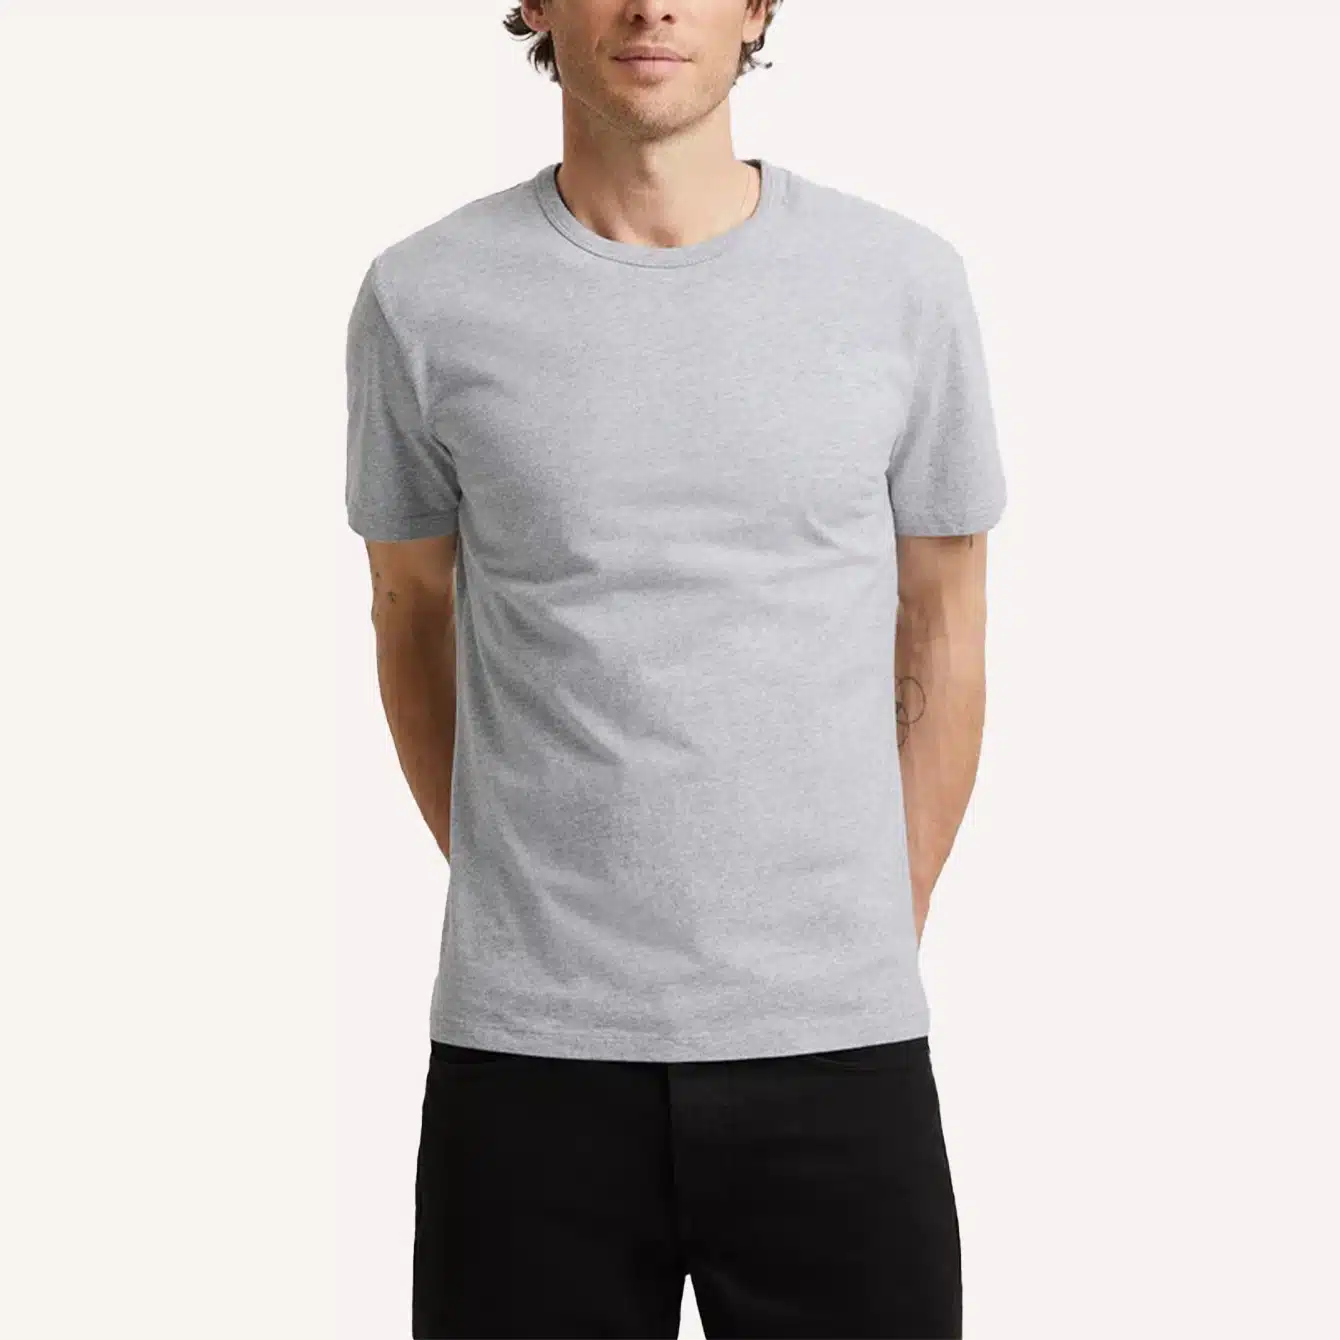 8 Great T-Shirts Brands for Men